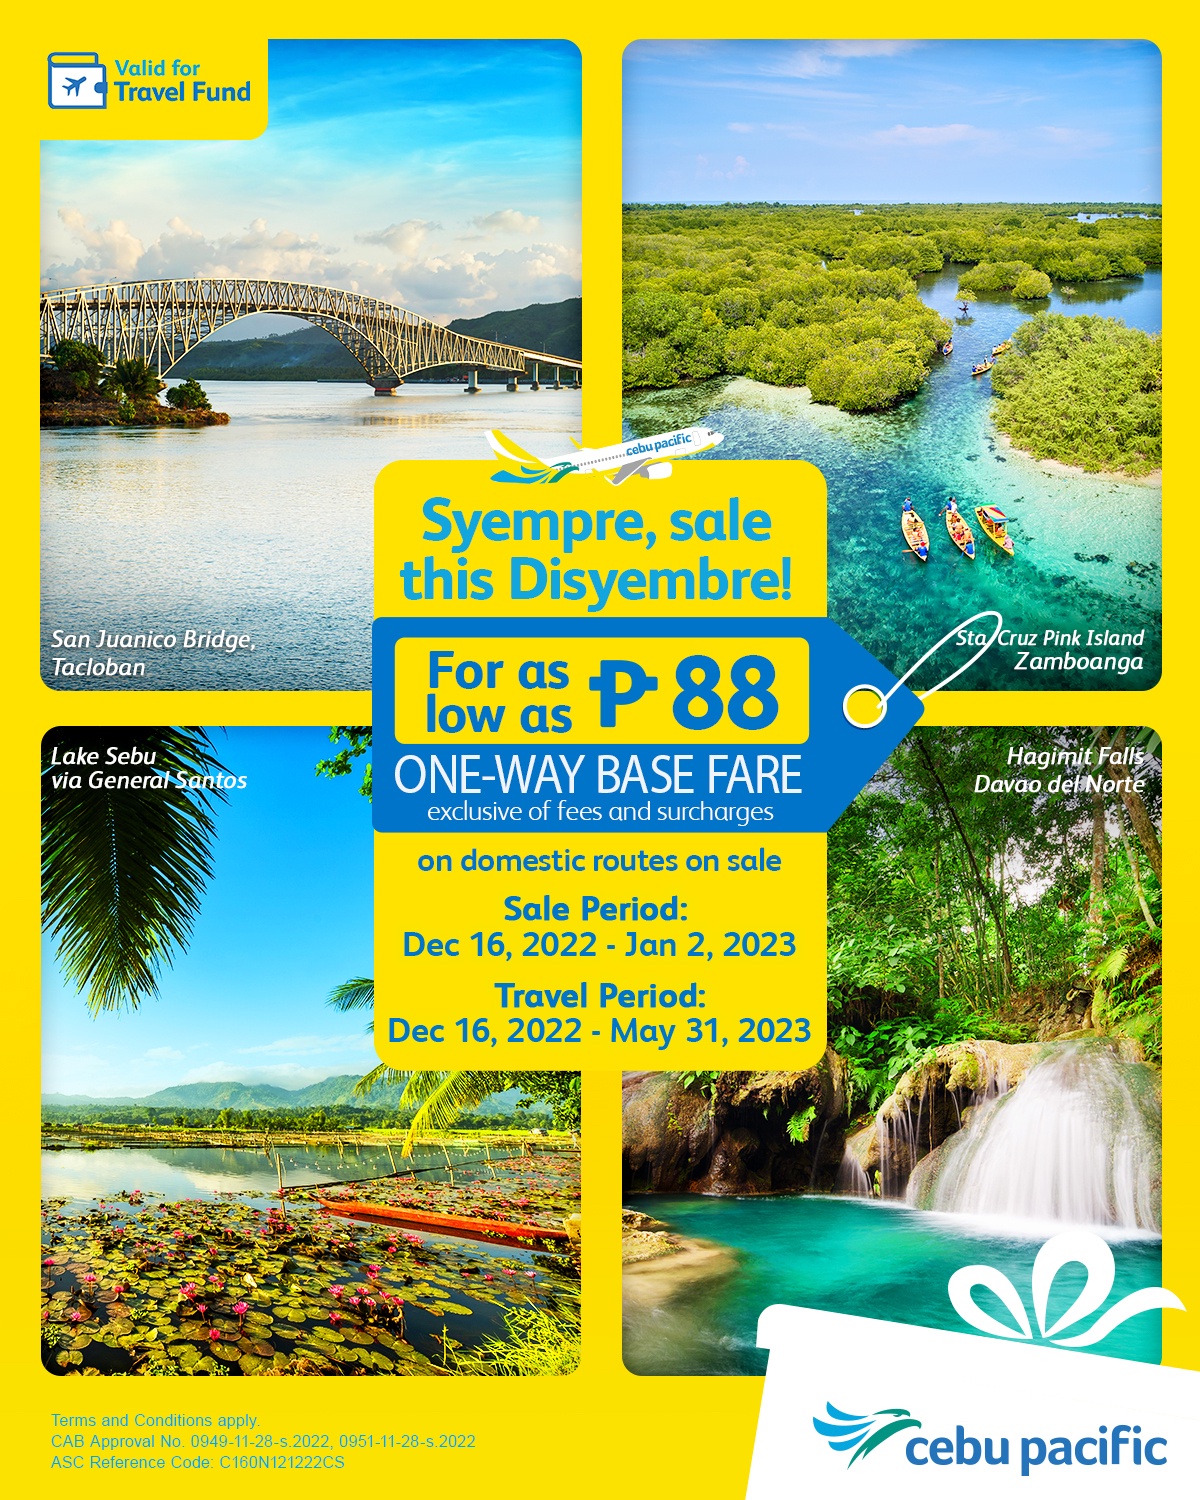 Explore more of the Philippines with Cebu Pacific for as low as PHP 88 featured image